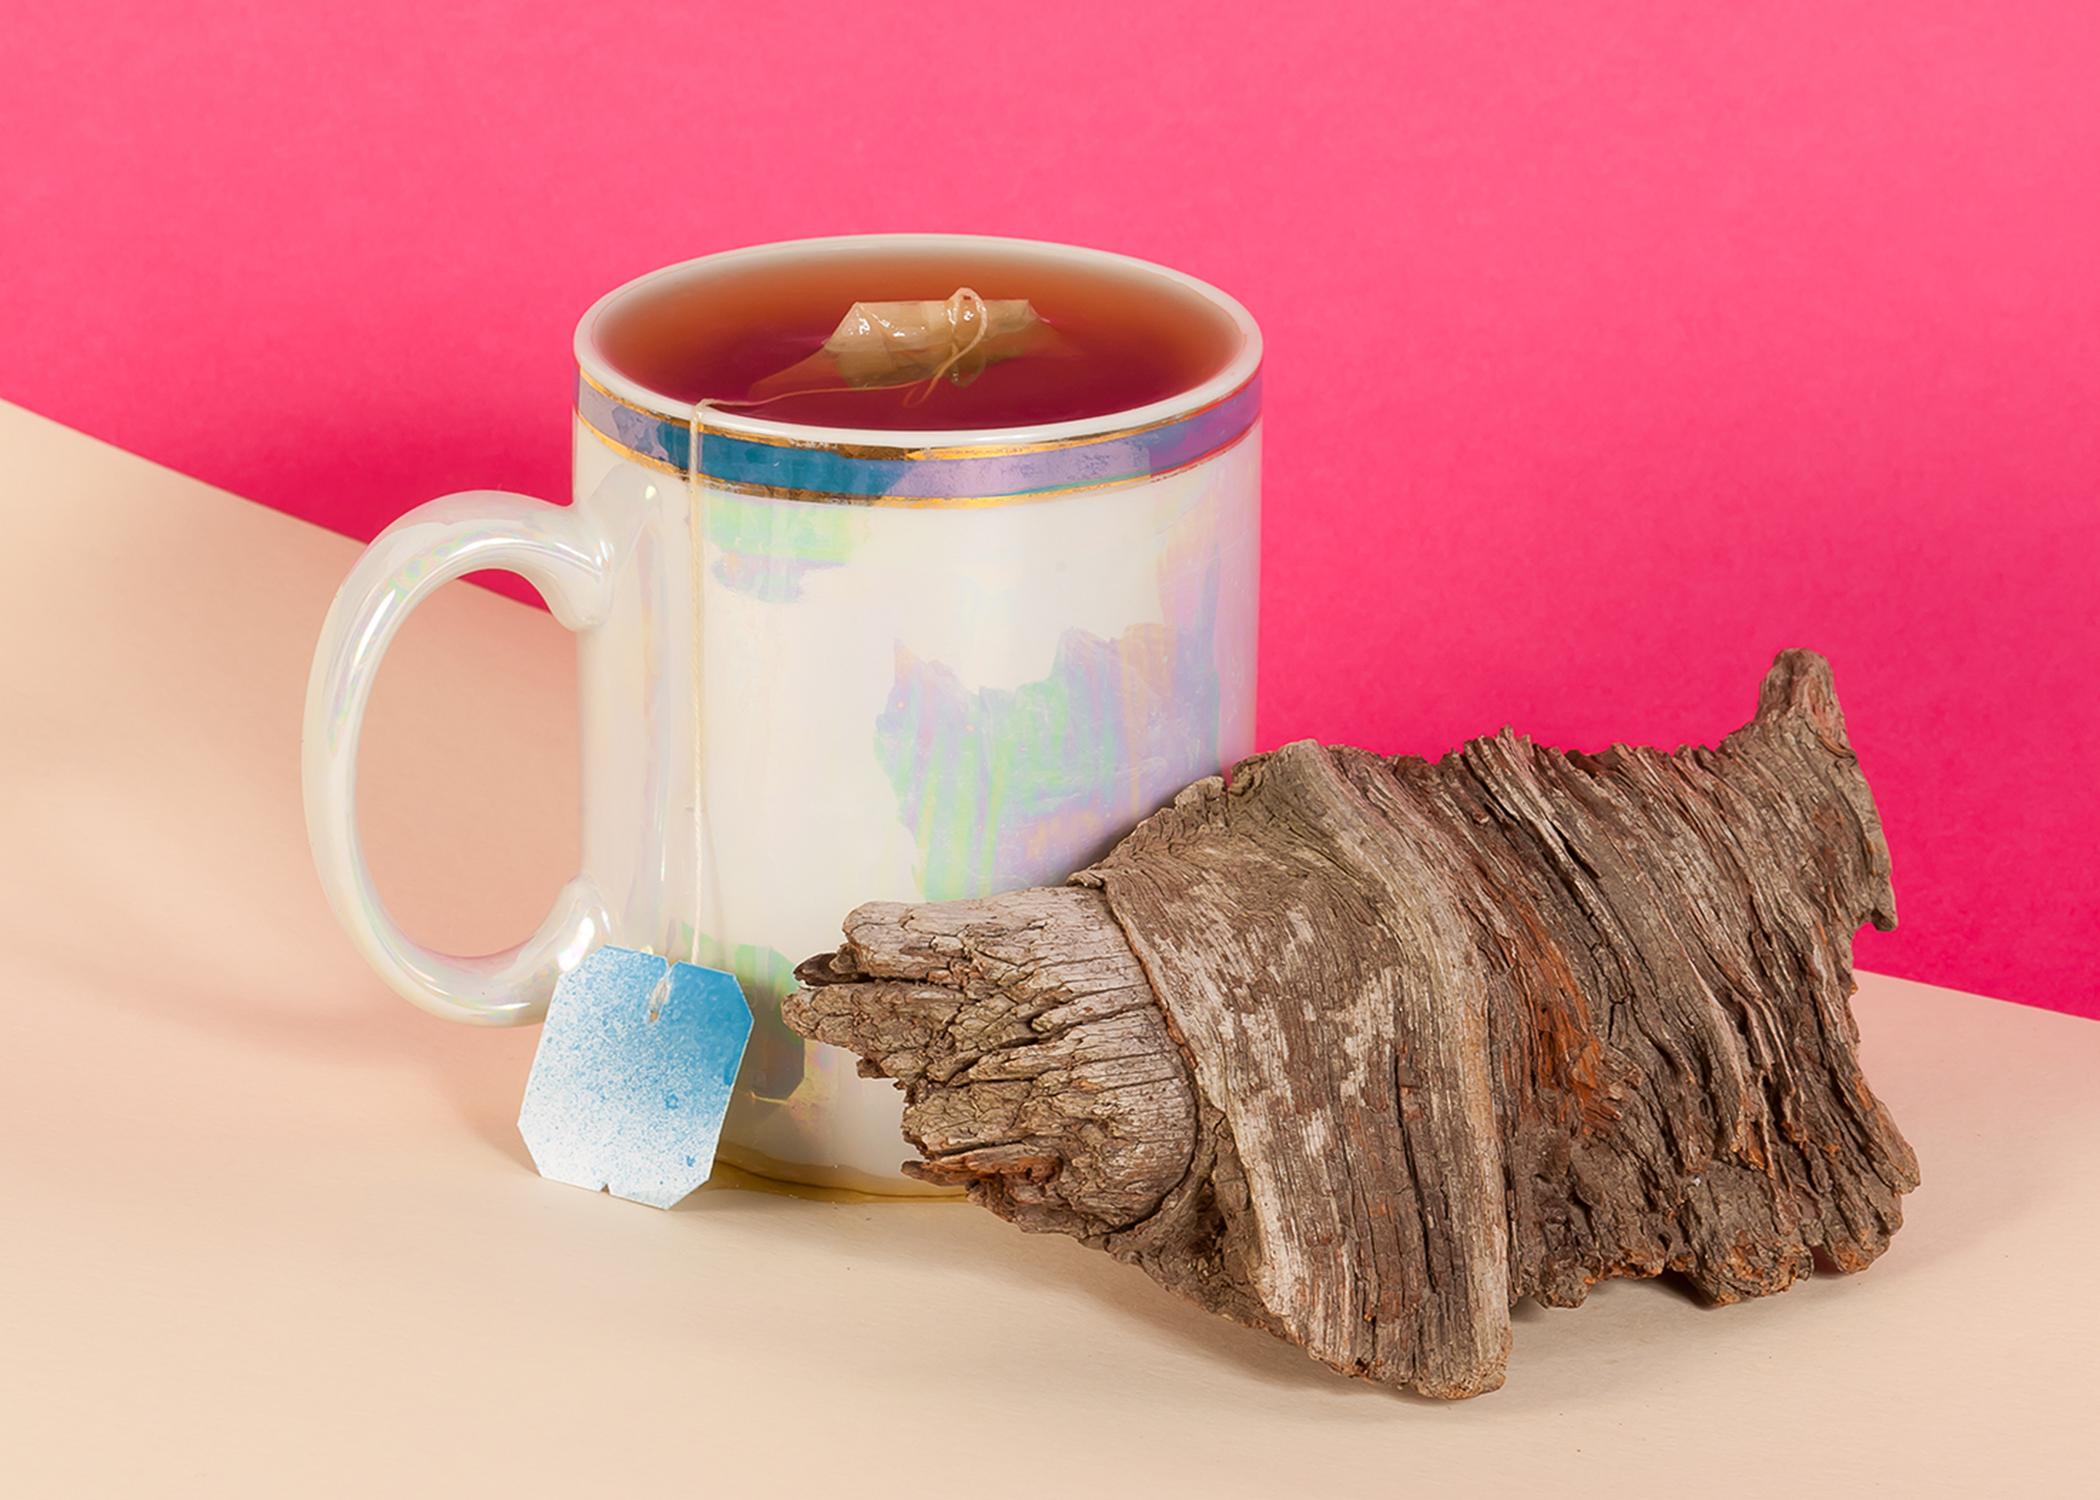 Pink Background Still Life Scene, Cup of Tea, Wood Croissant, Retro, Giclée  For Sale 3